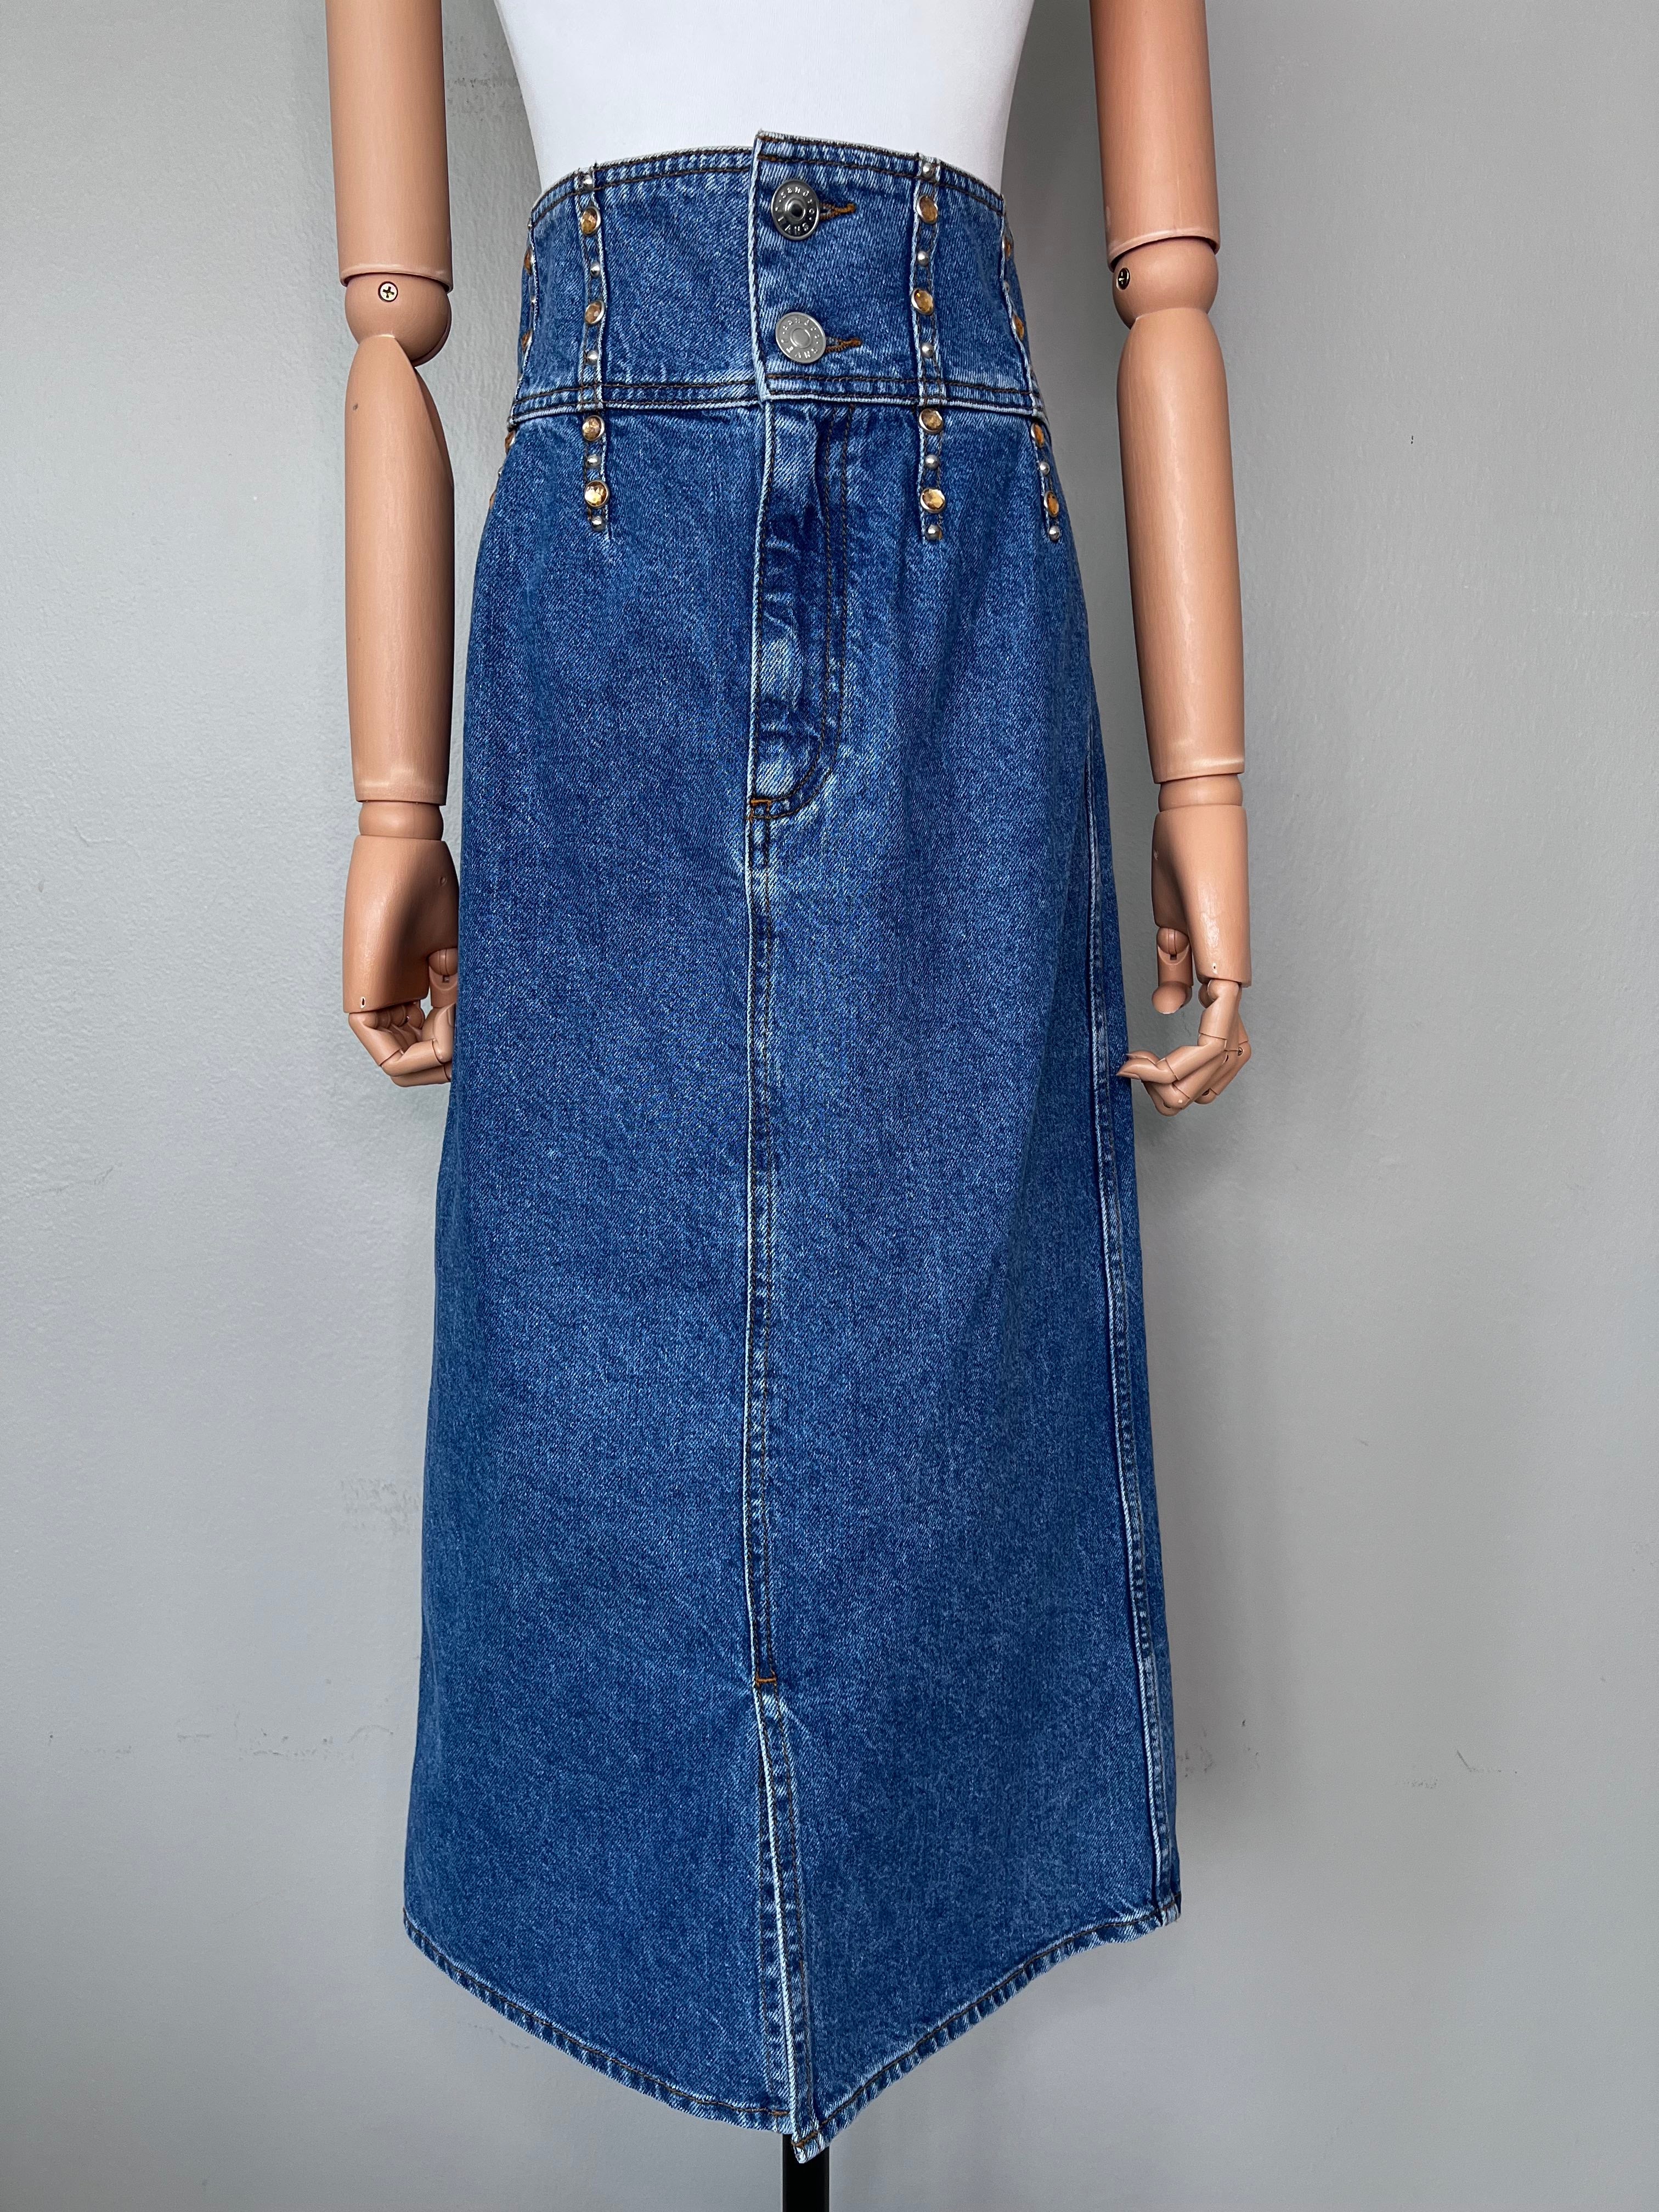 Under-the-knee denim skirt with an extra thick waistband, double buttons, and jewels going down the waistband. - SANDRO